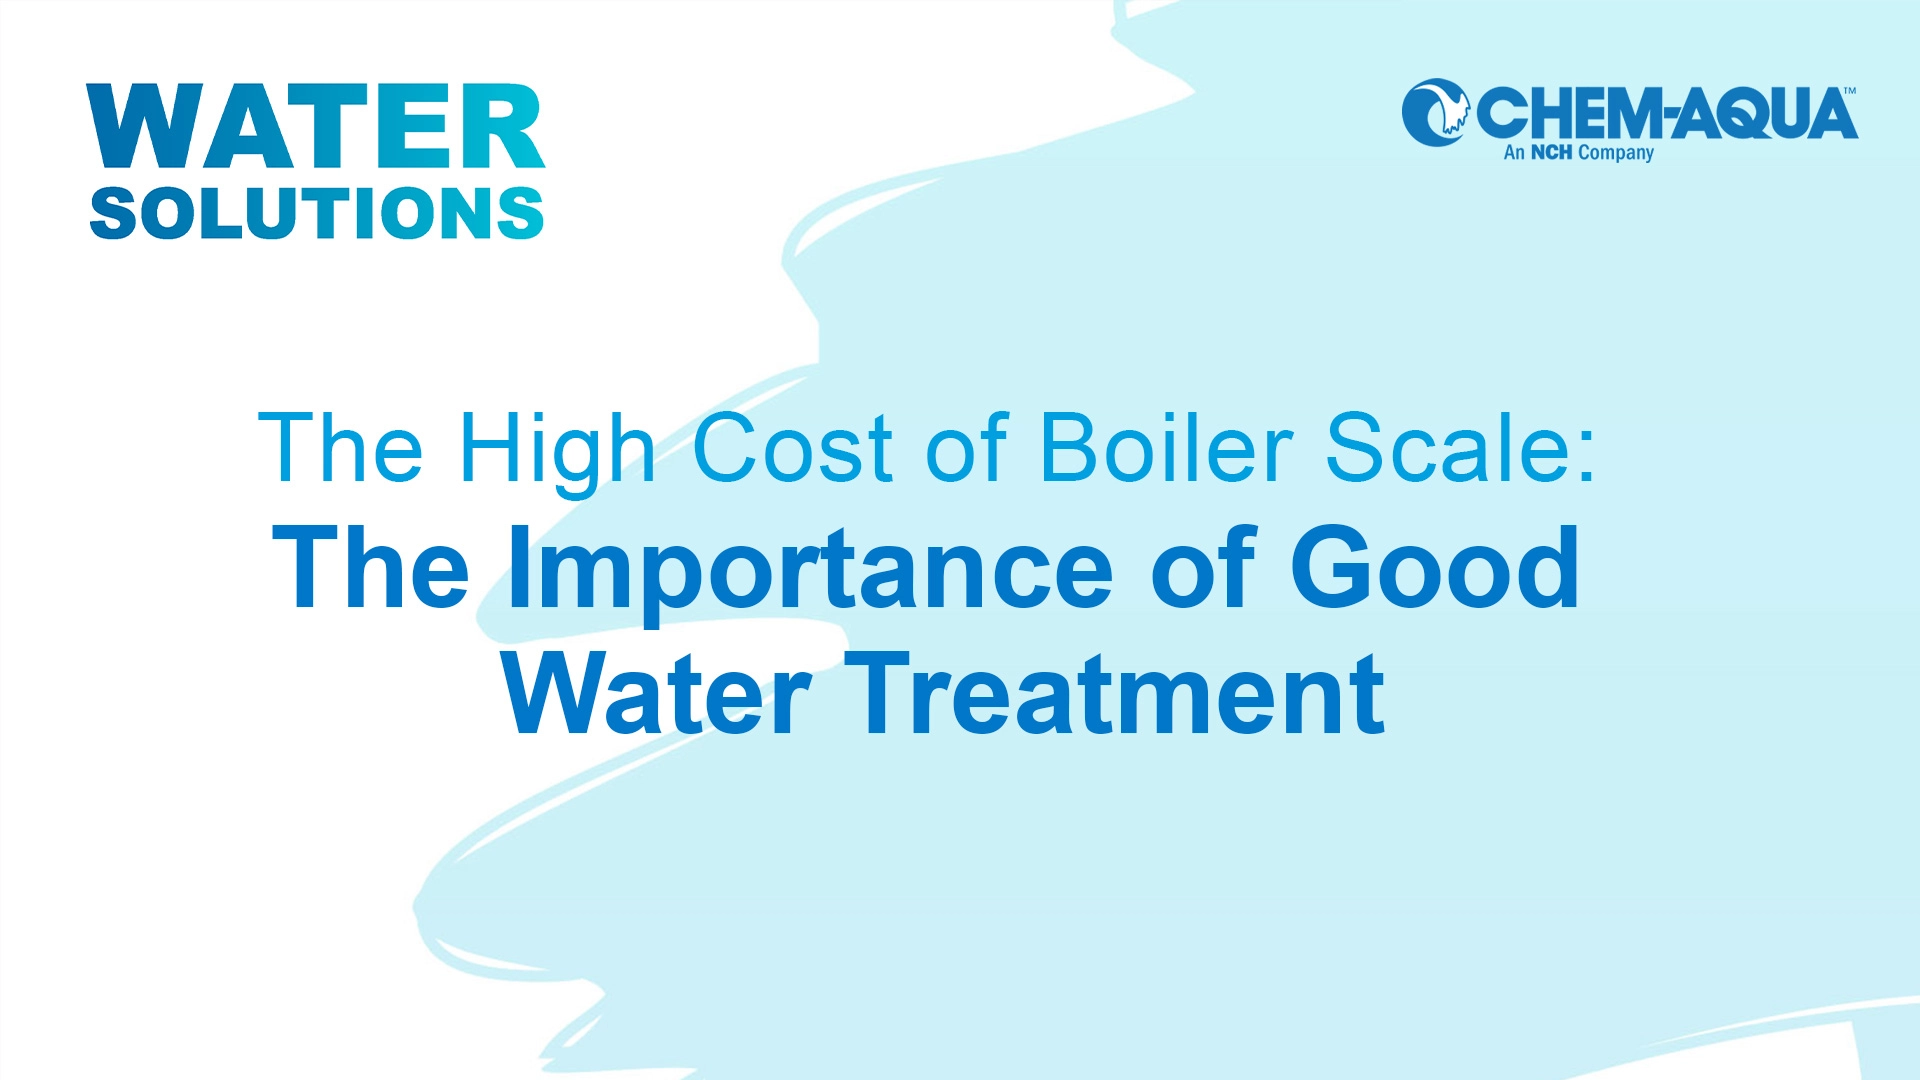 The High Cost of Boiler Scale: The Importance of Good Water Treatment